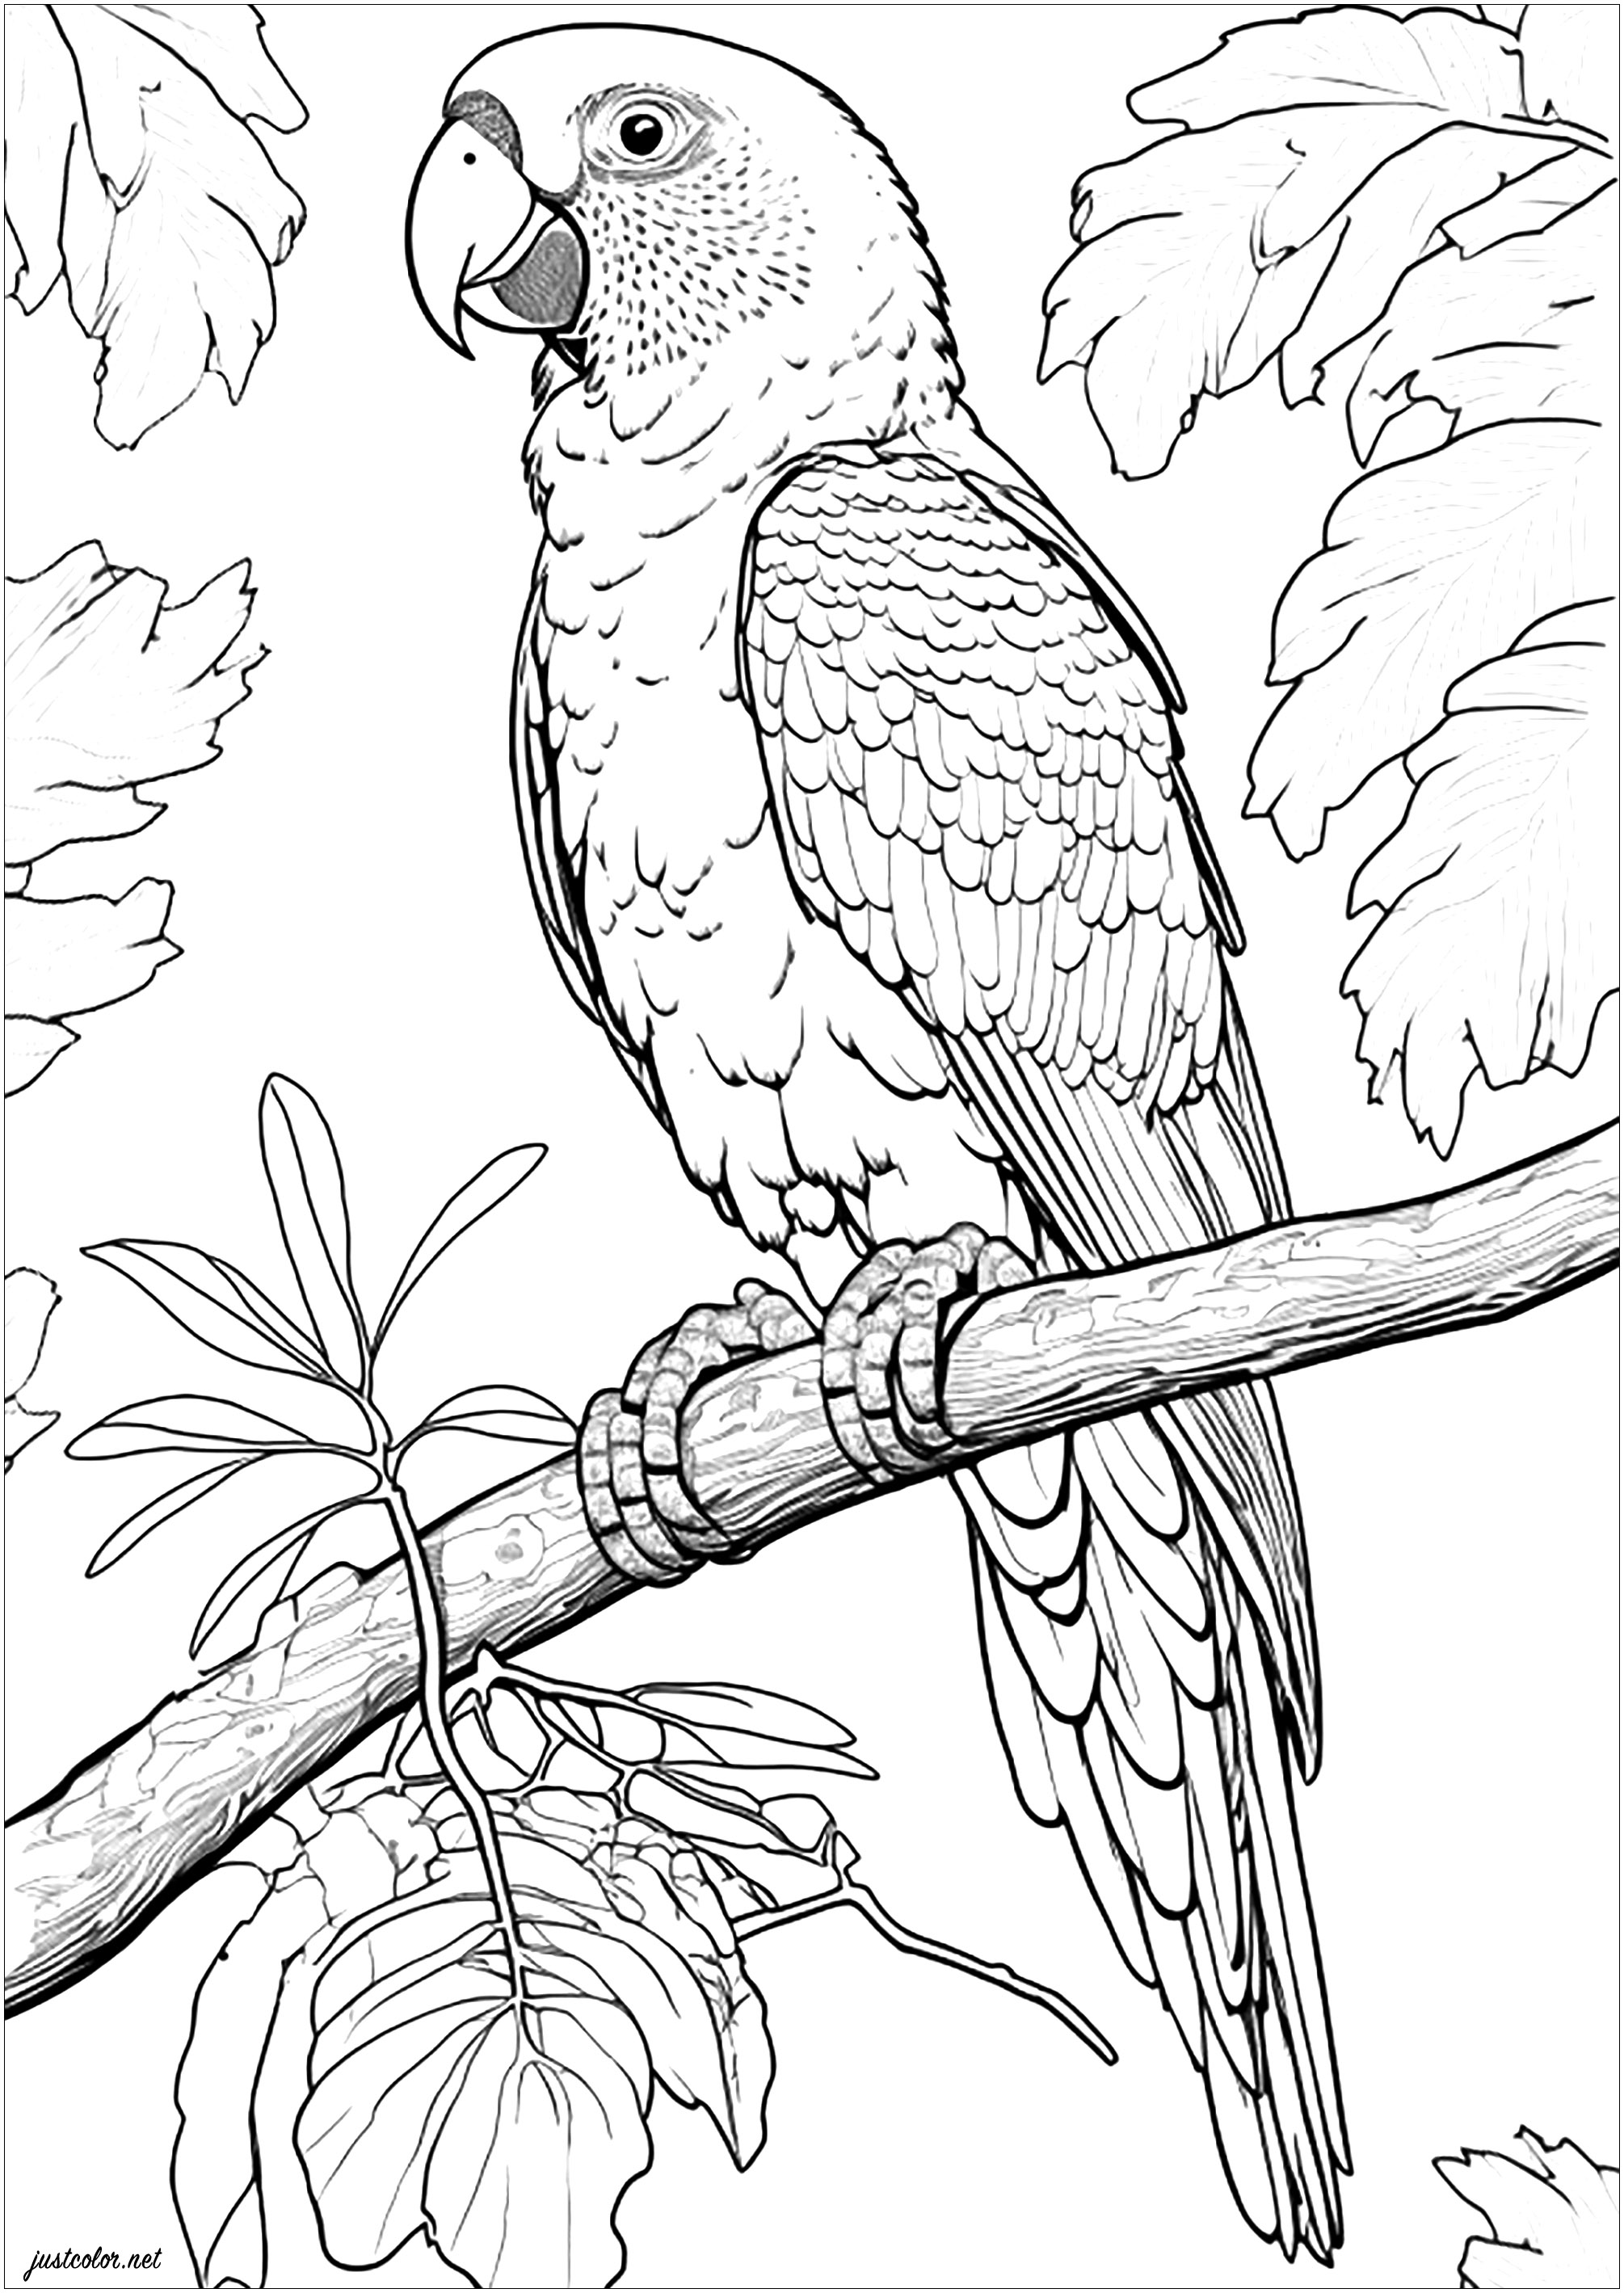 Realistic Amazon parrot coloring page. You can bring this parrot of the Amazona genus to life by coloring its feathers in any color you like. Hint: parrots of this species are green and yellow! This pretty parrot will be enhanced by the surrounding vegetation, which you can color discreetly or brightly, depending on the desired effect.